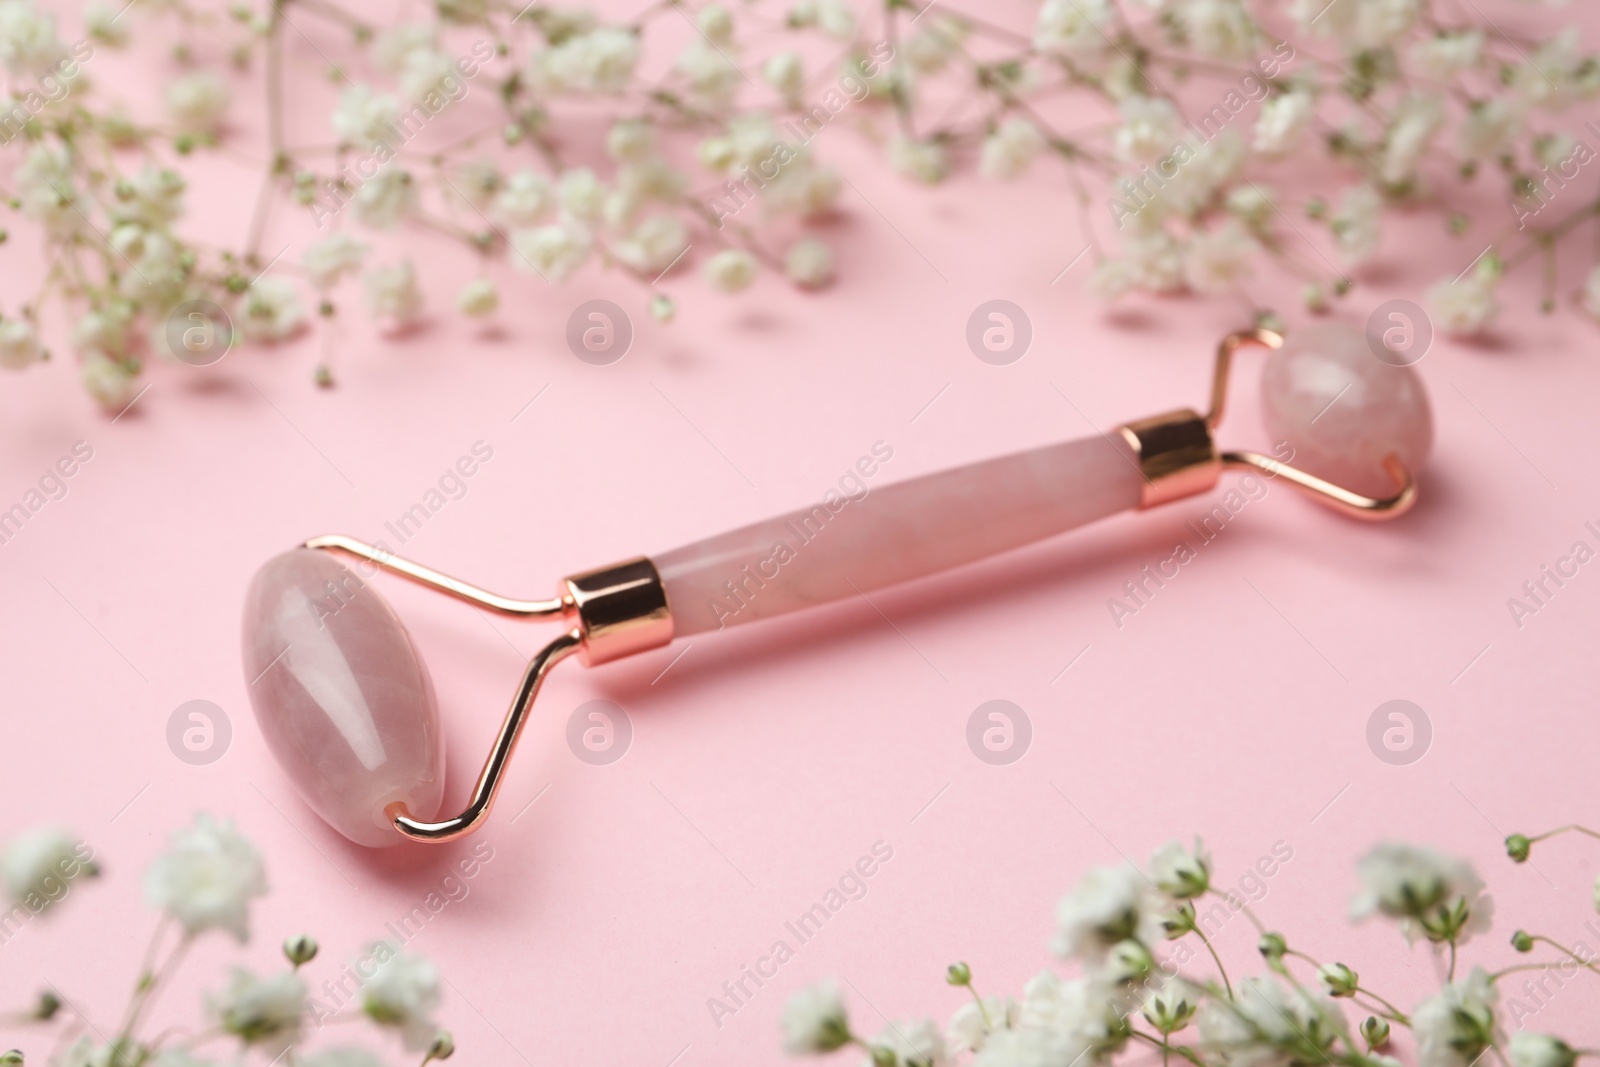 Photo of Natural face roller and flowers on pink background